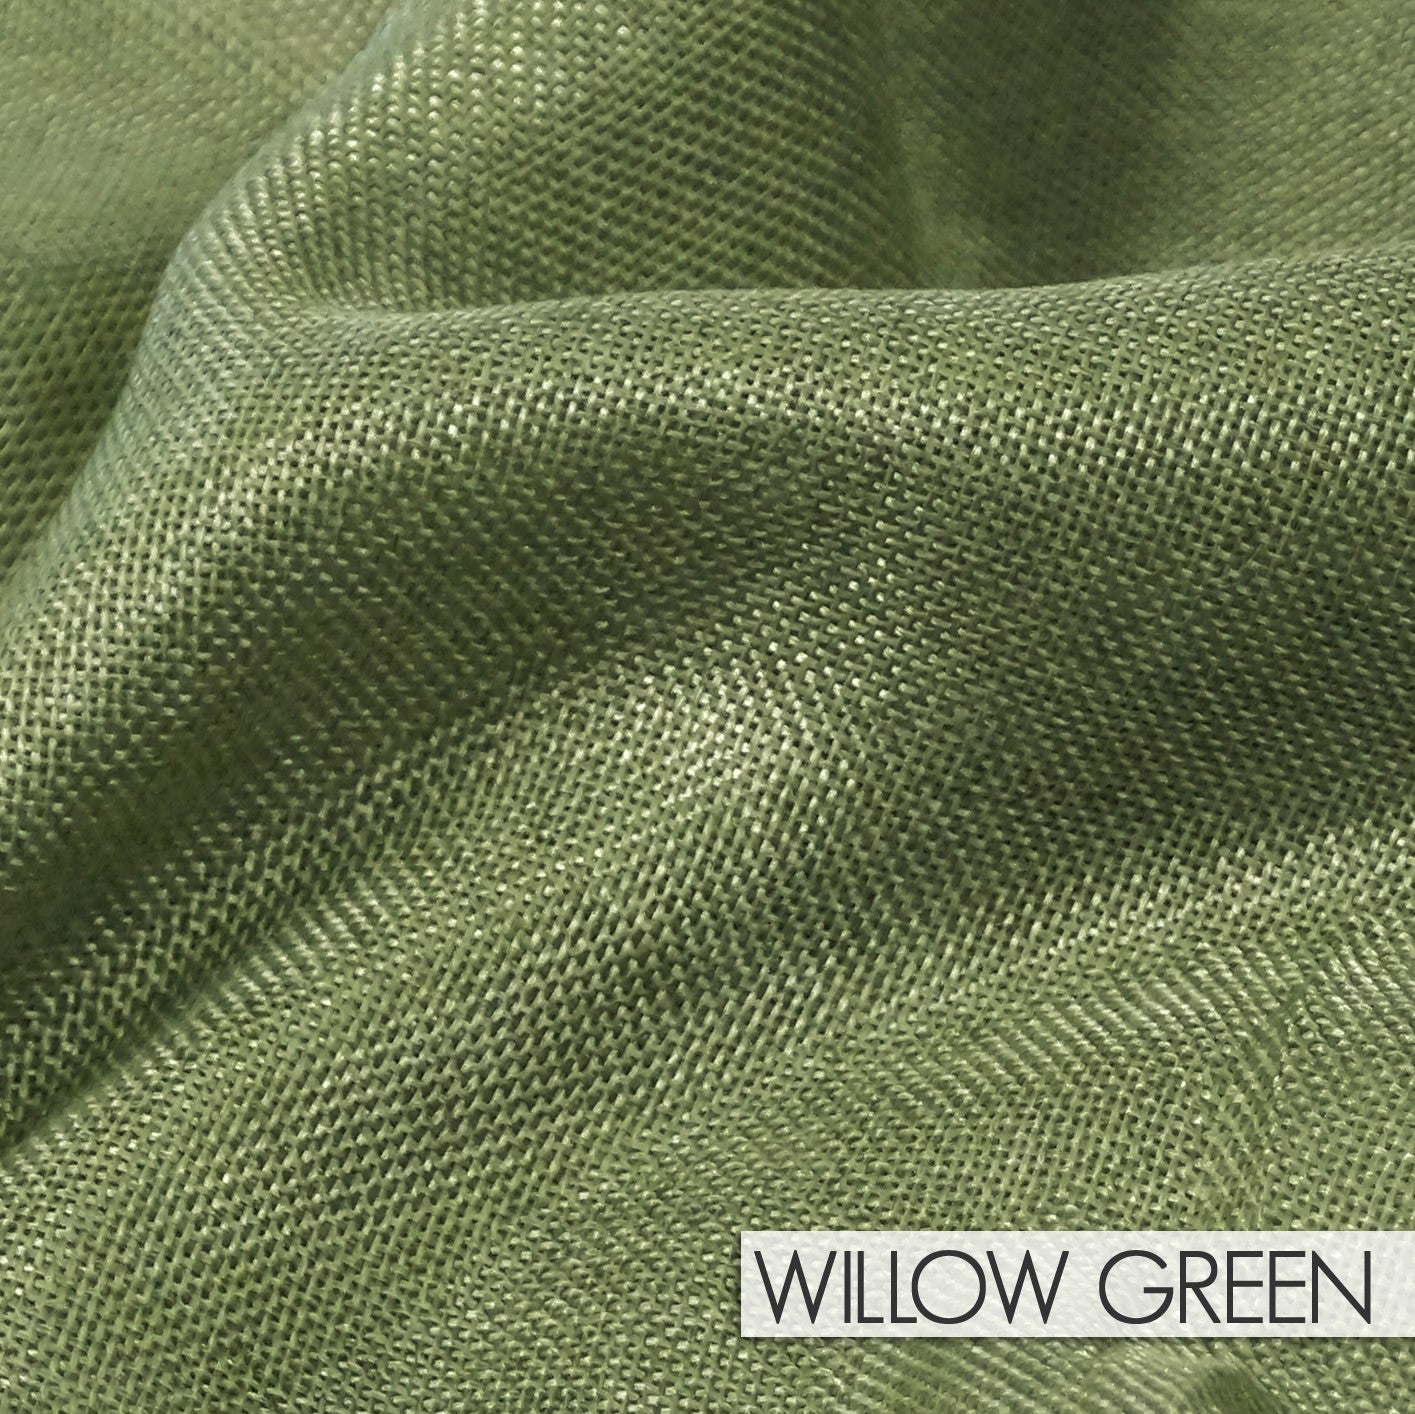 WILLOW GREEN